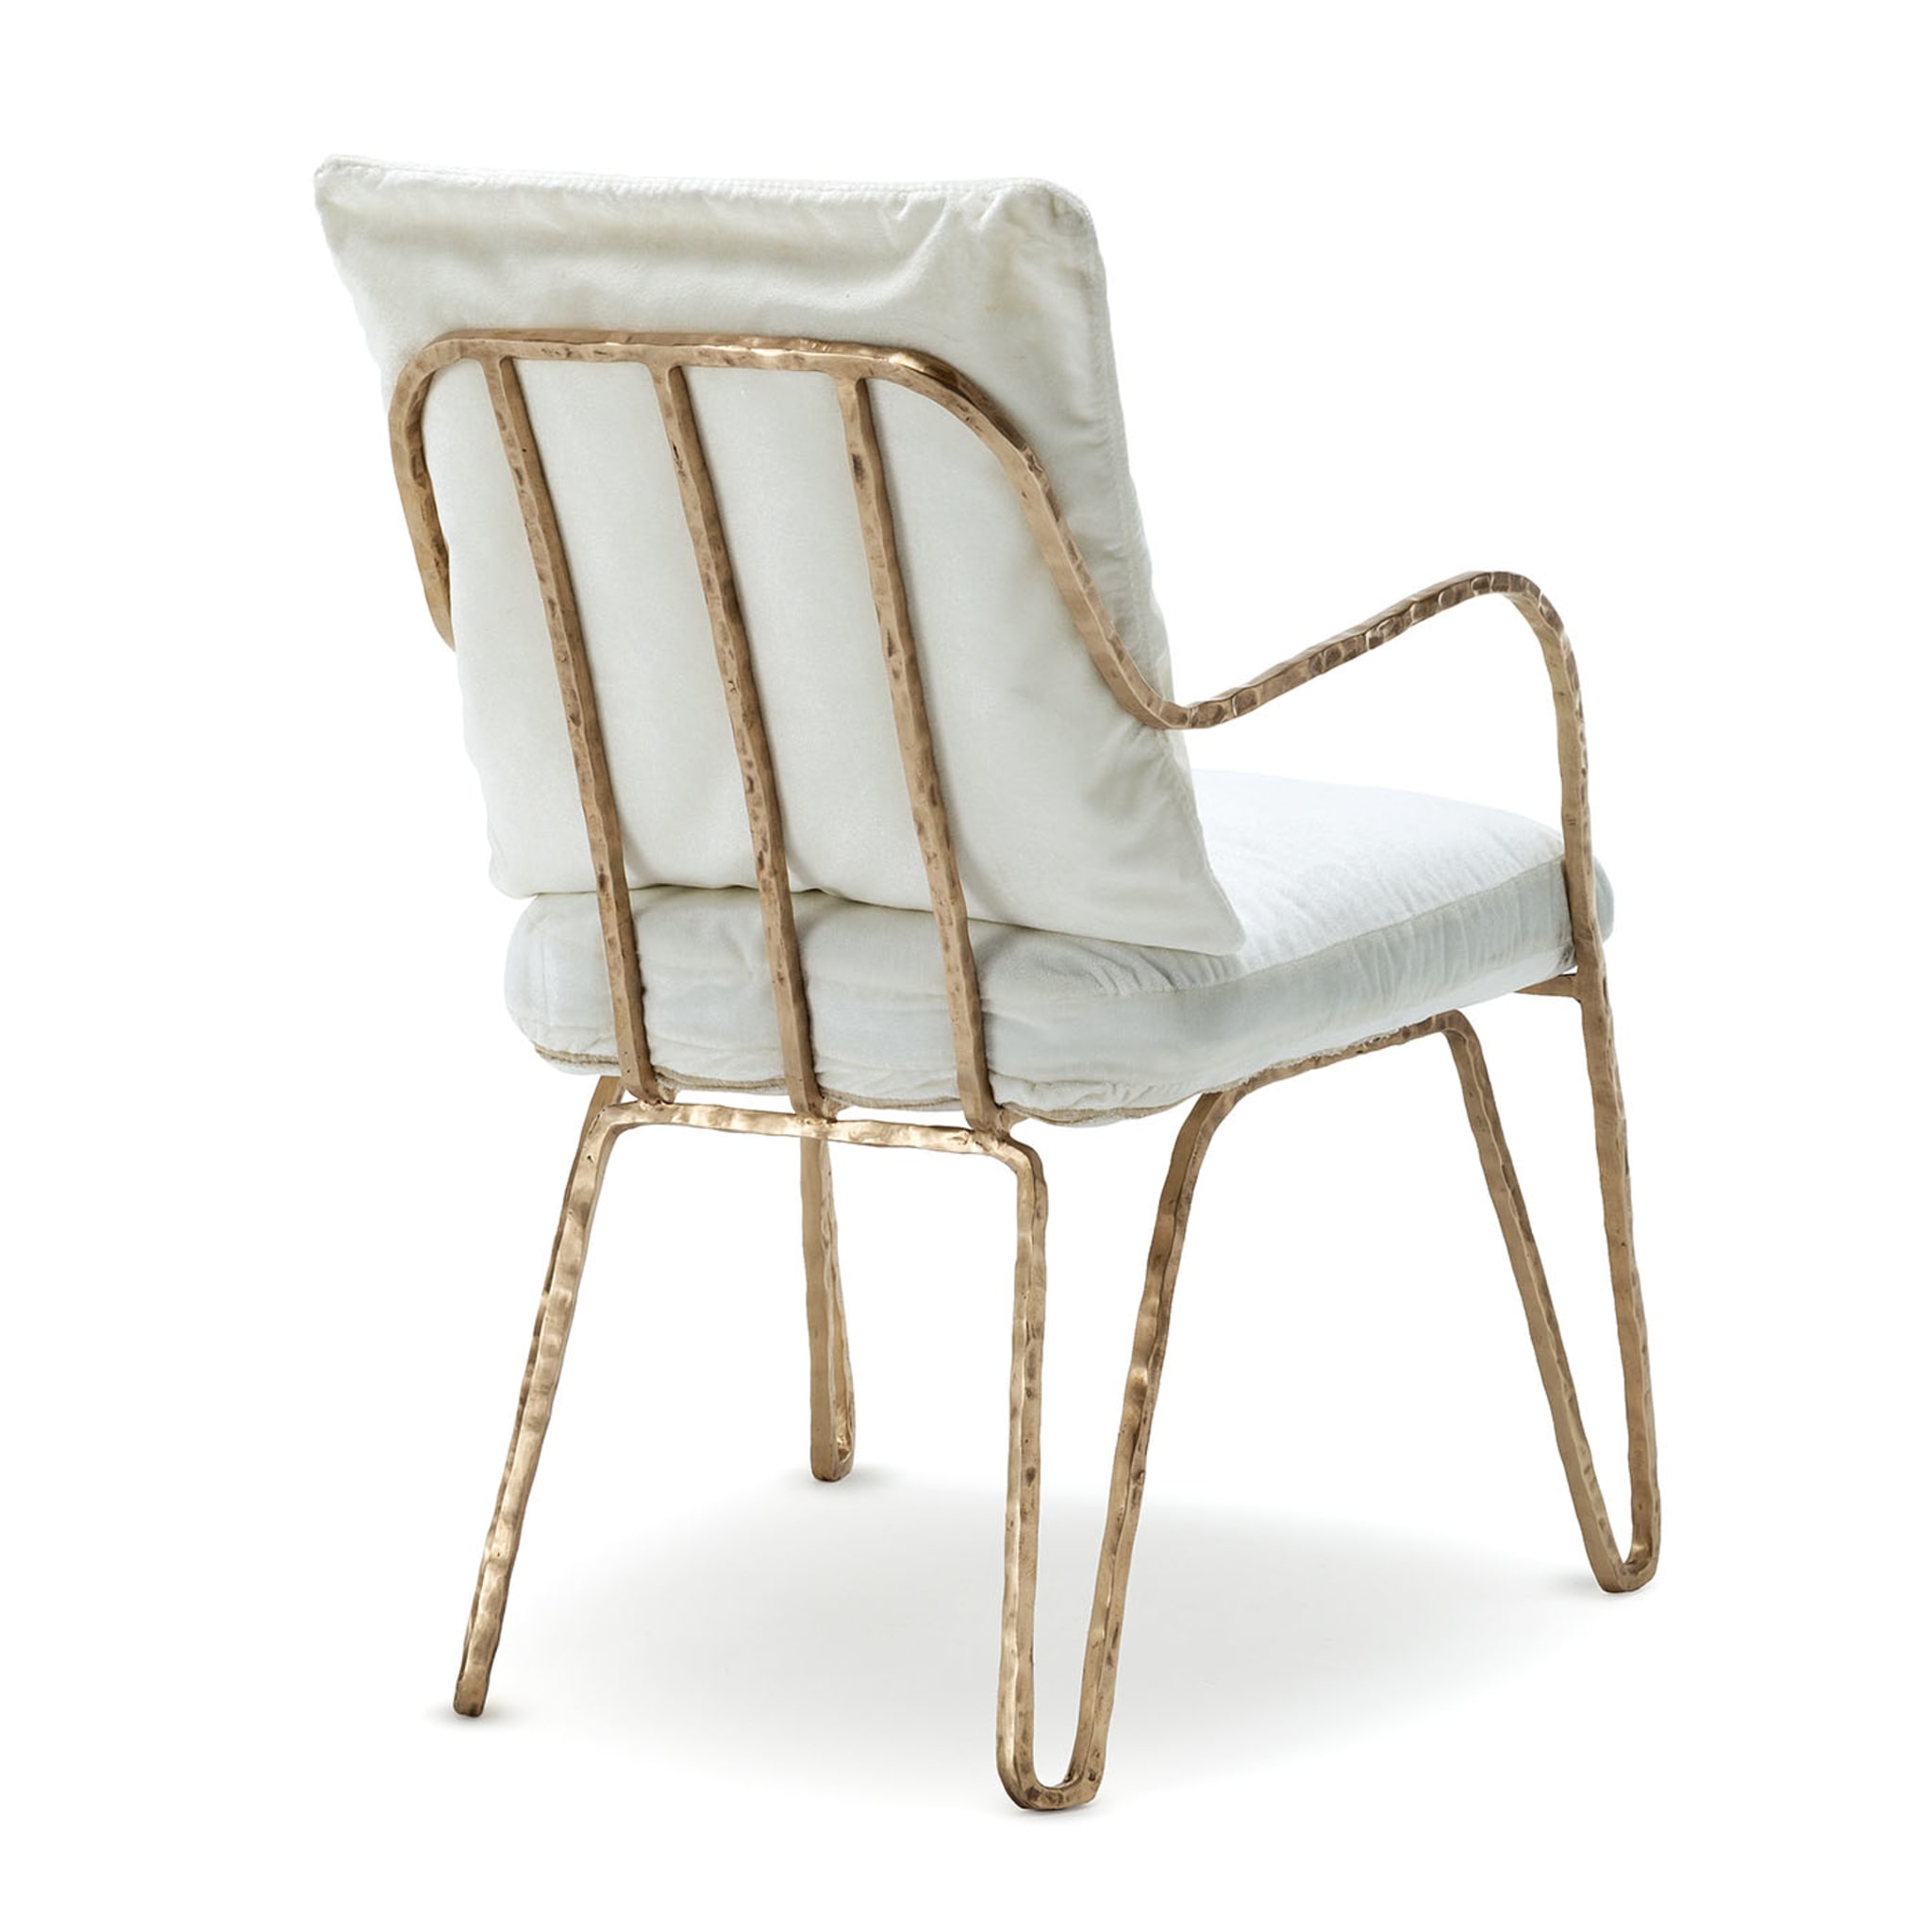 Moonlight White and Gold Low Chair - Alternative view 2